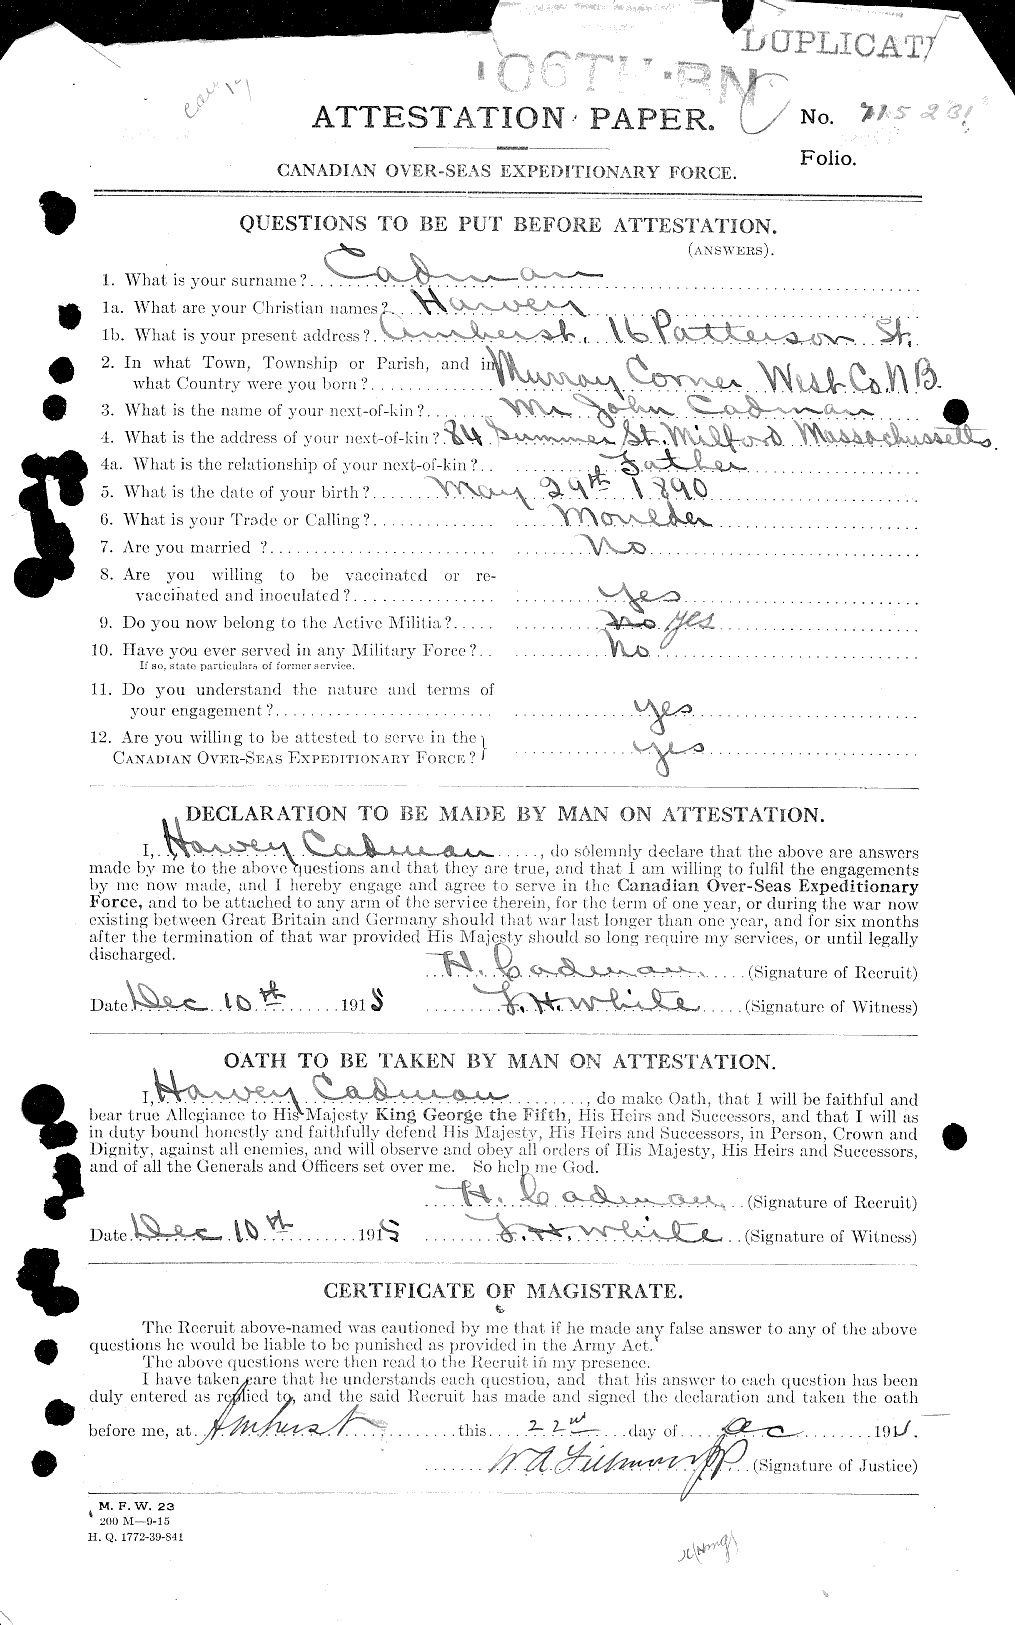 Personnel Records of the First World War - CEF 001639a